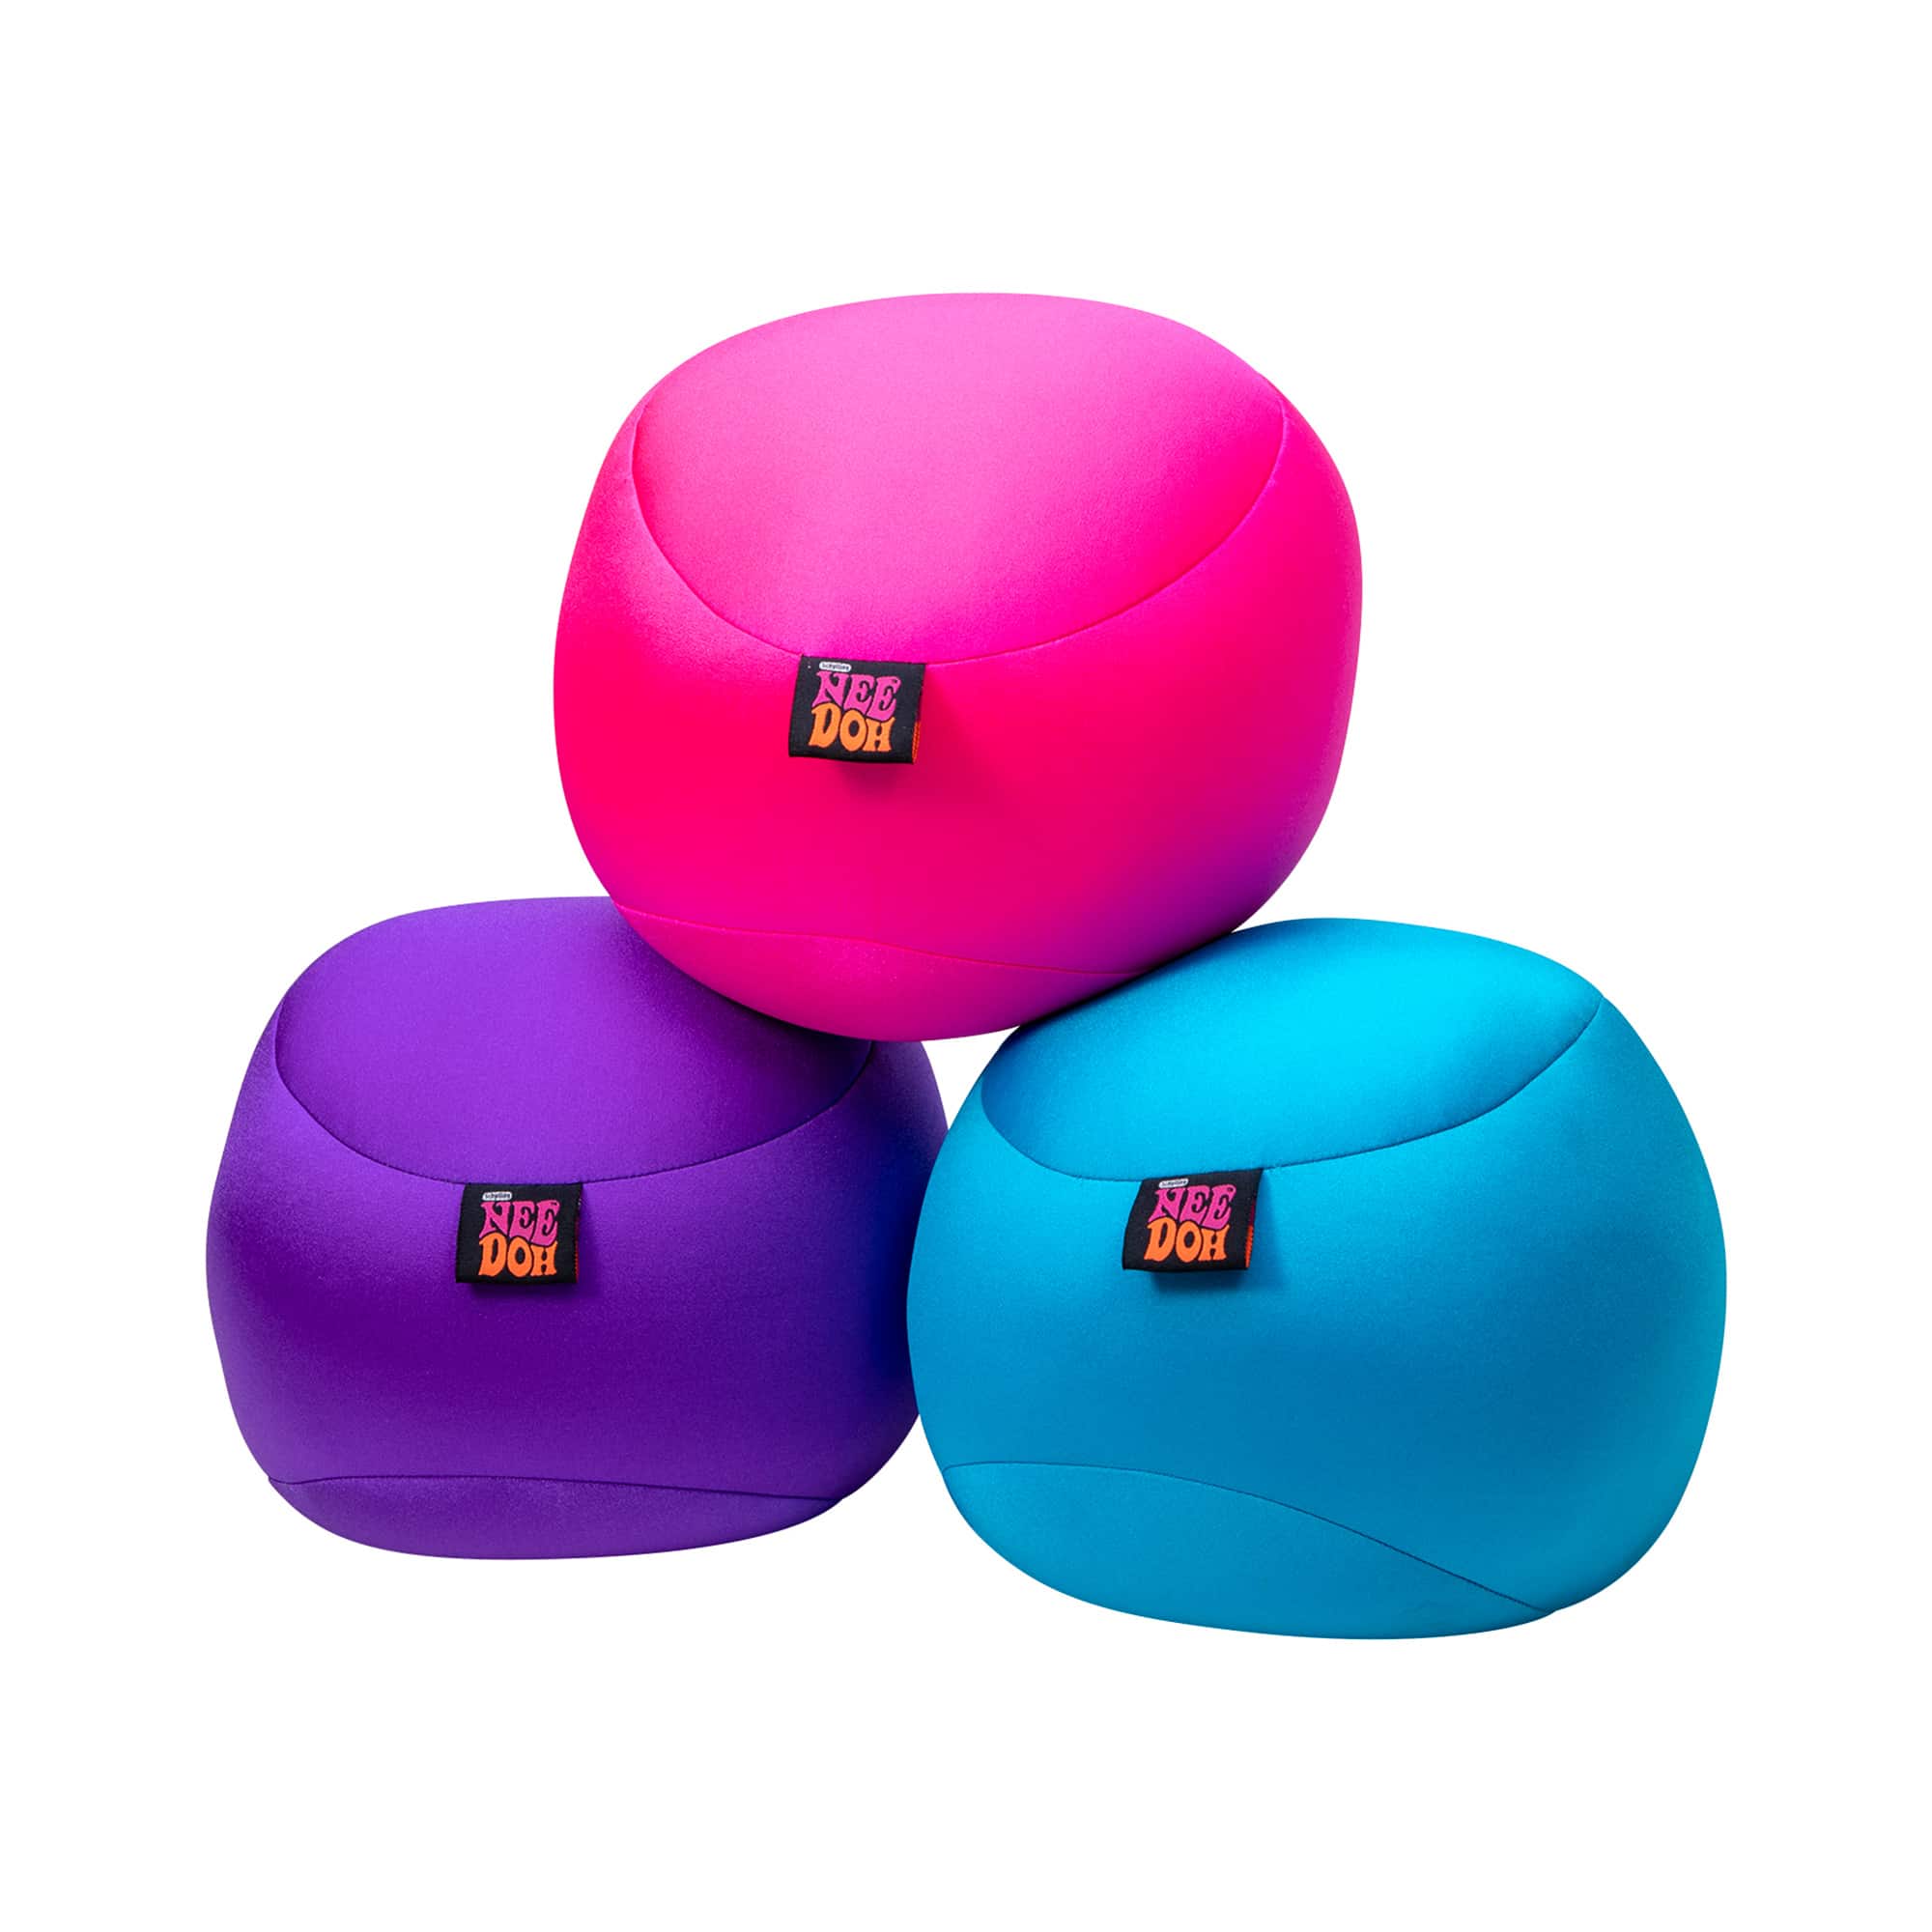 A display of the three colors of Dohzee balls.